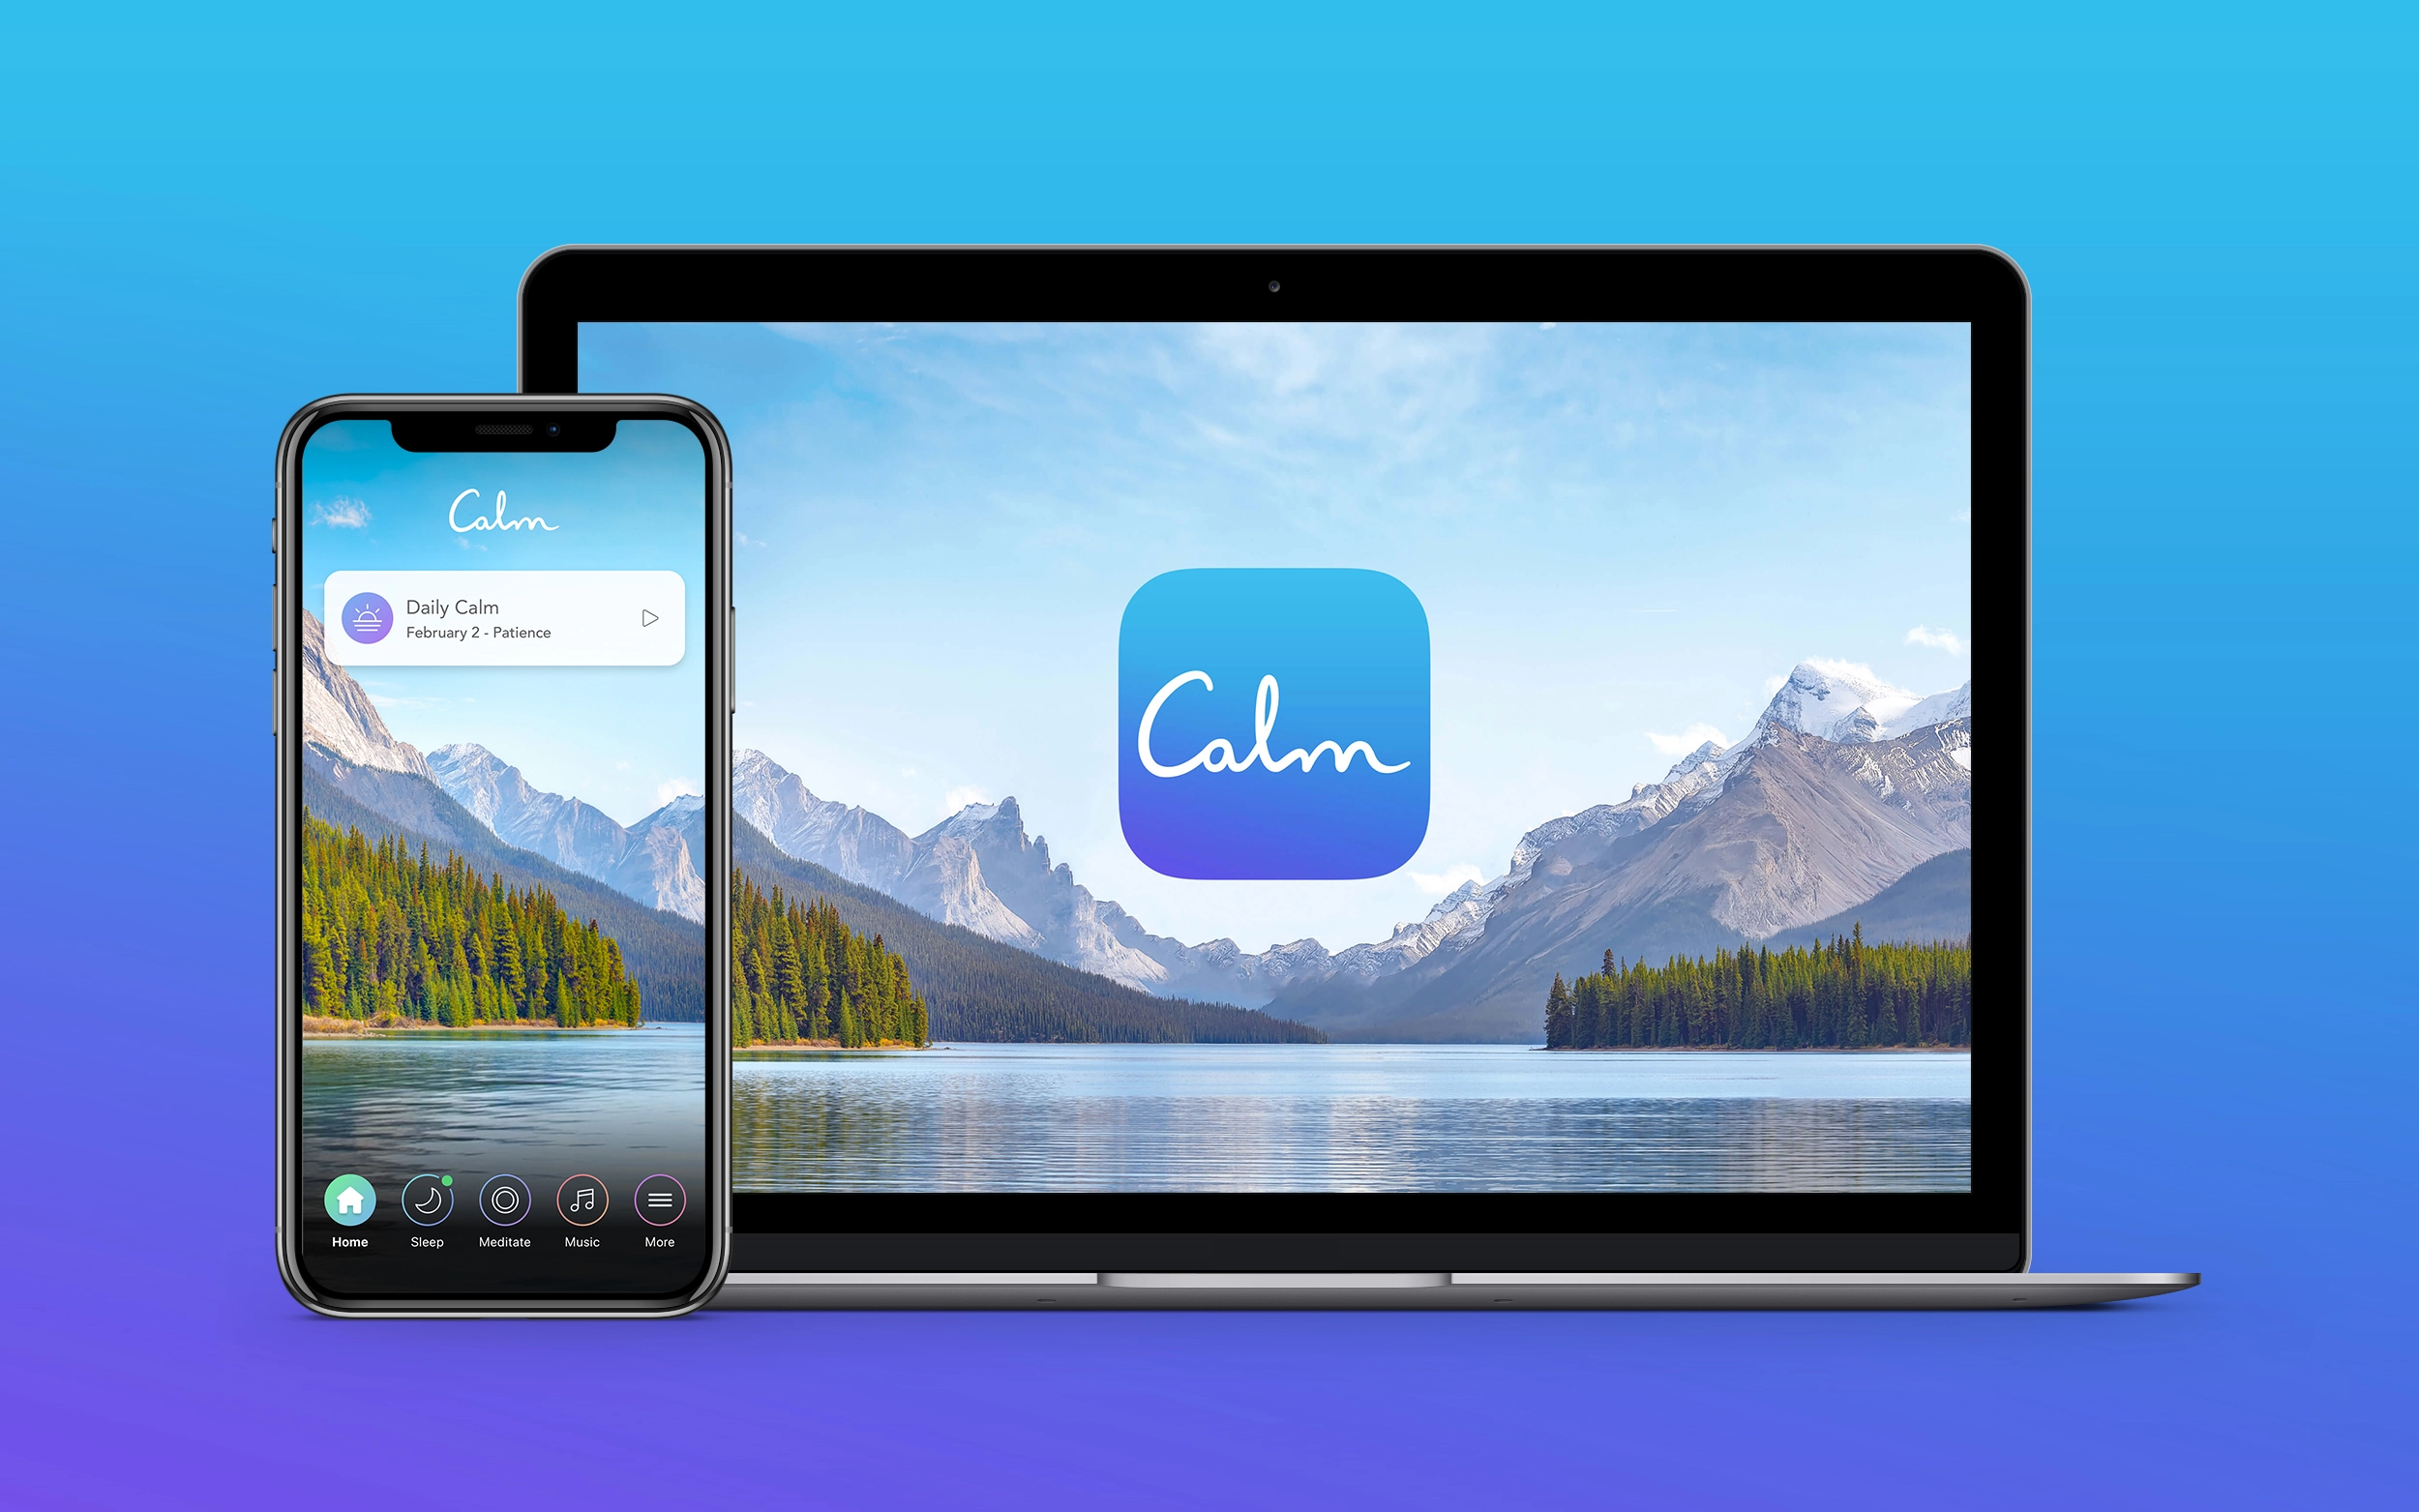 Calm Premium - 3 Months Trial Subscription Key (ONLY FOR NEW ACCOUNTS), 0.8$